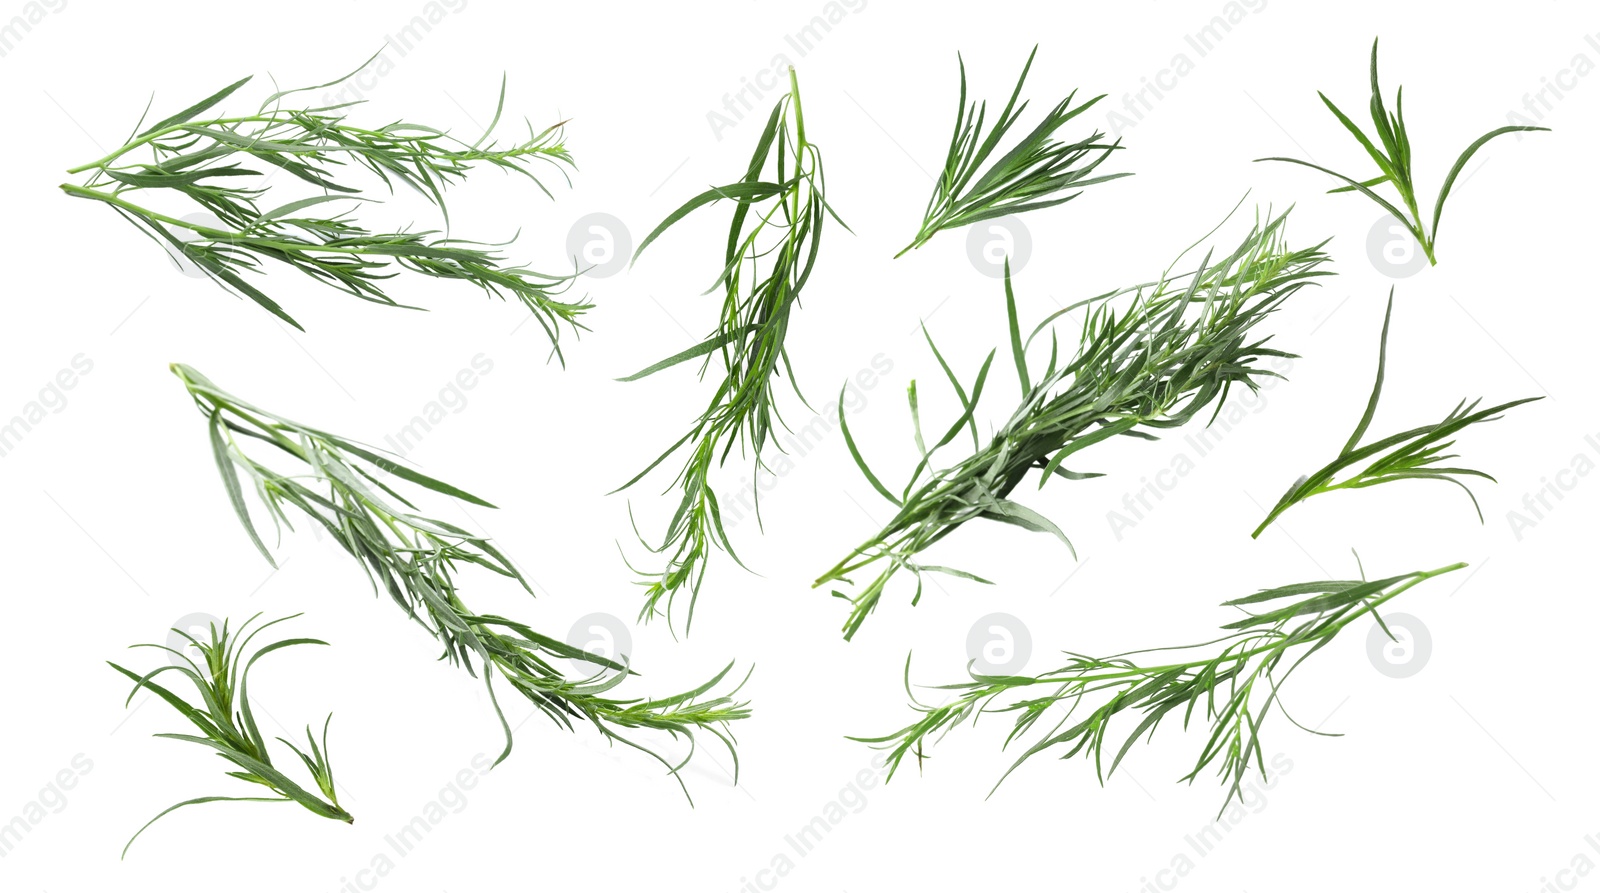 Image of Set with green tarragon isolated on white